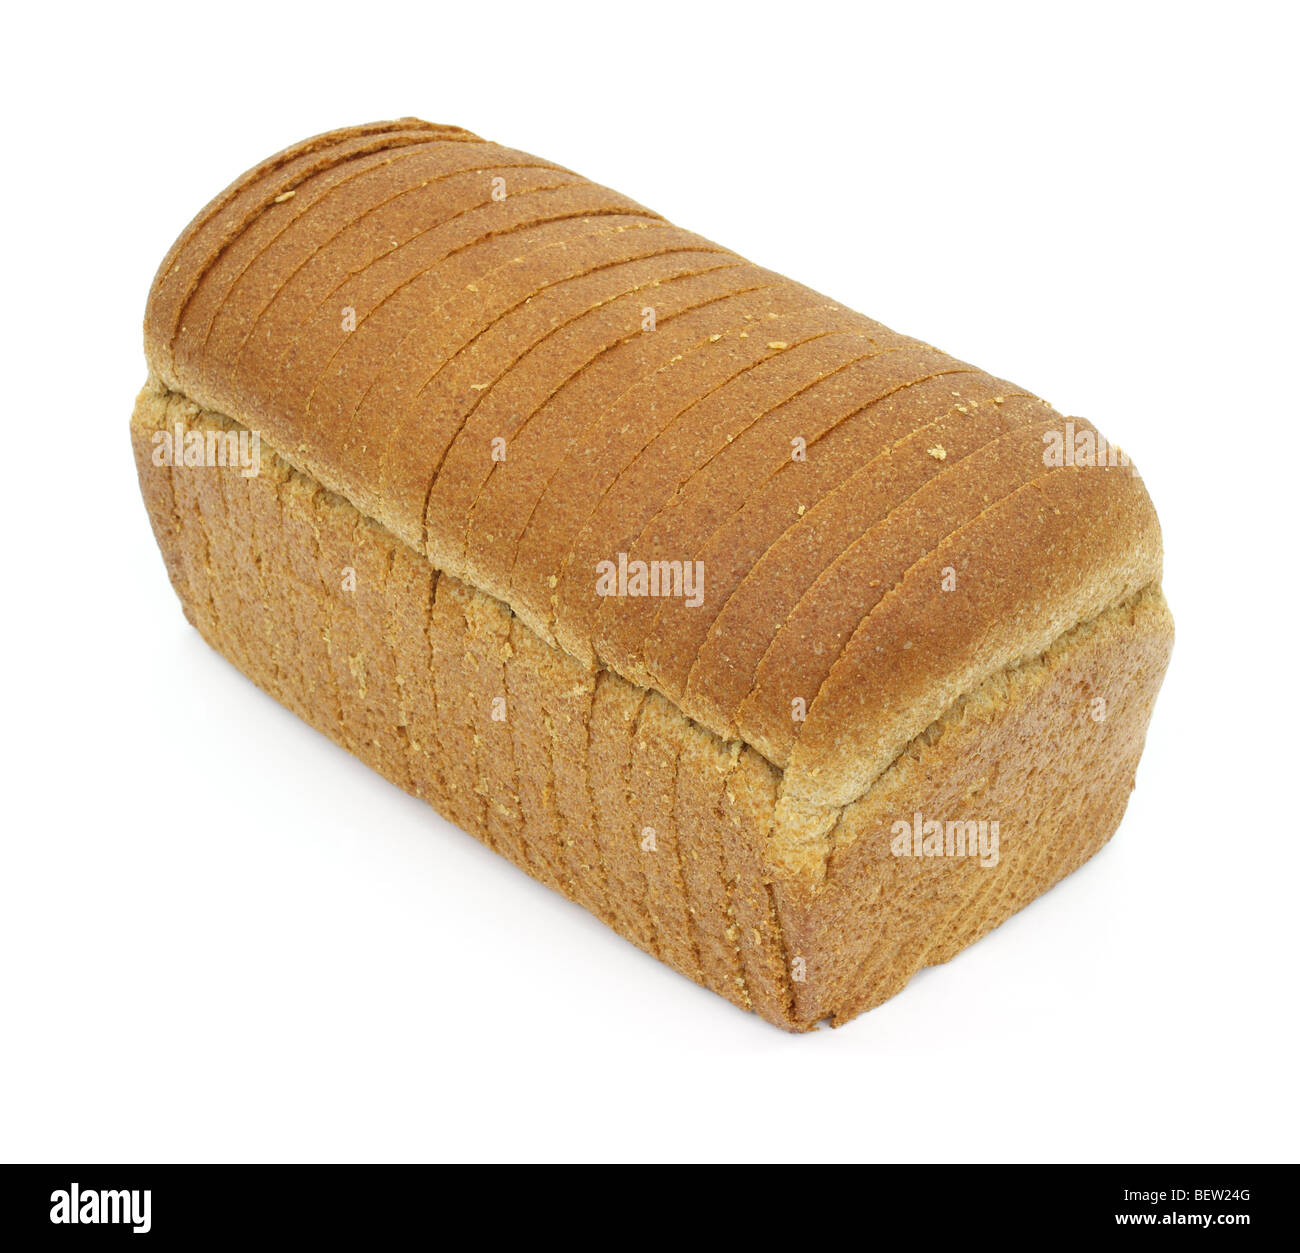 Small size dieter's wheat bread loaf Stock Photo